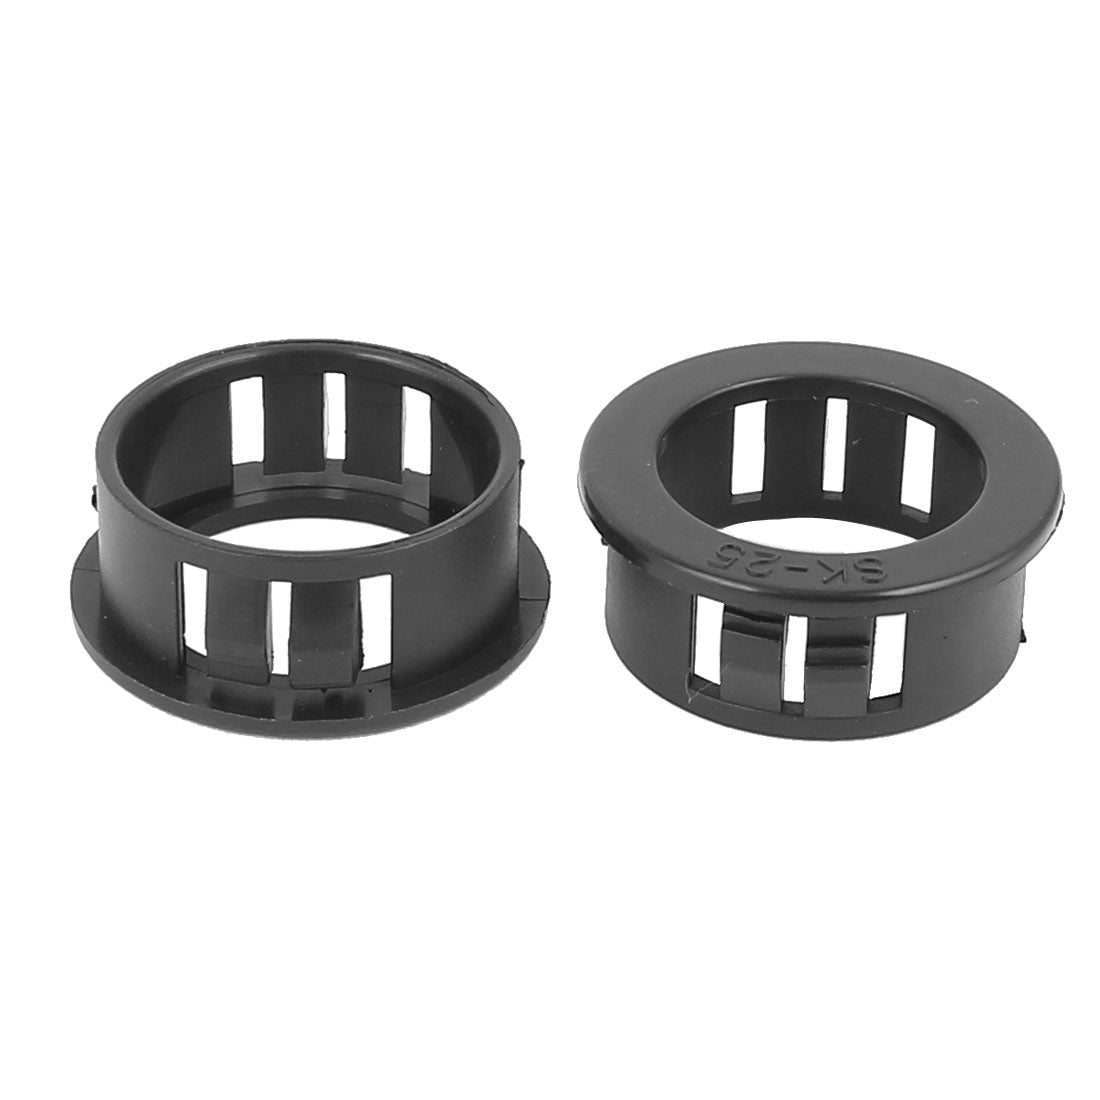 uxcell Uxcell 20pcs 25mm Mounted Dia Snap in Cable Wire Bushing Grommet Protector Black